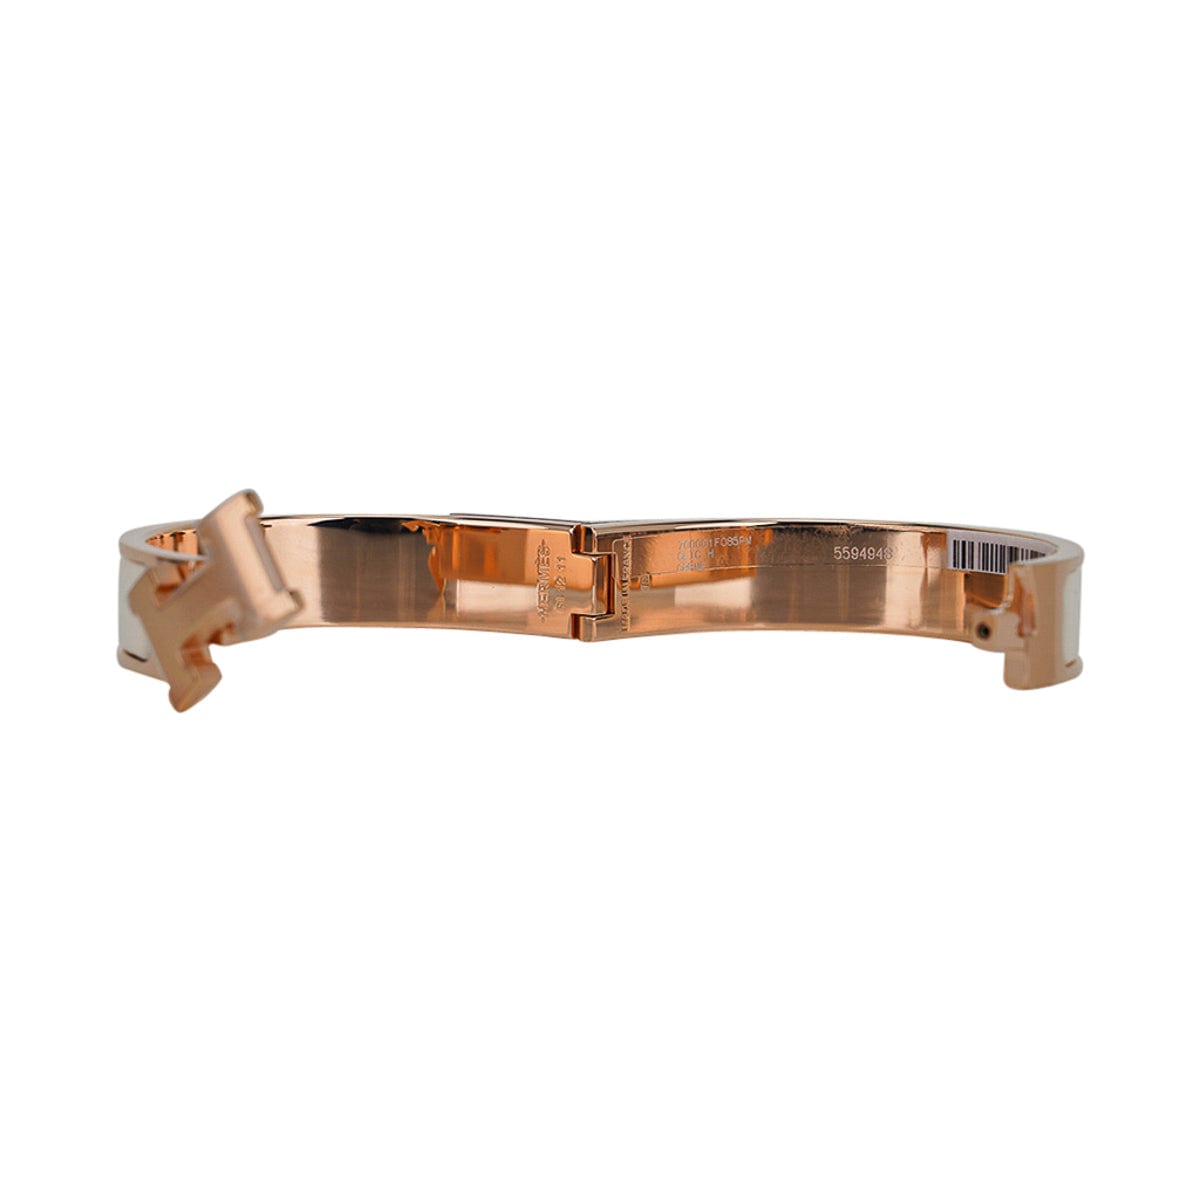 Hermes Narrow Clic H Bracelet (Rose Poudre/Yellow Gold Plated) - PM